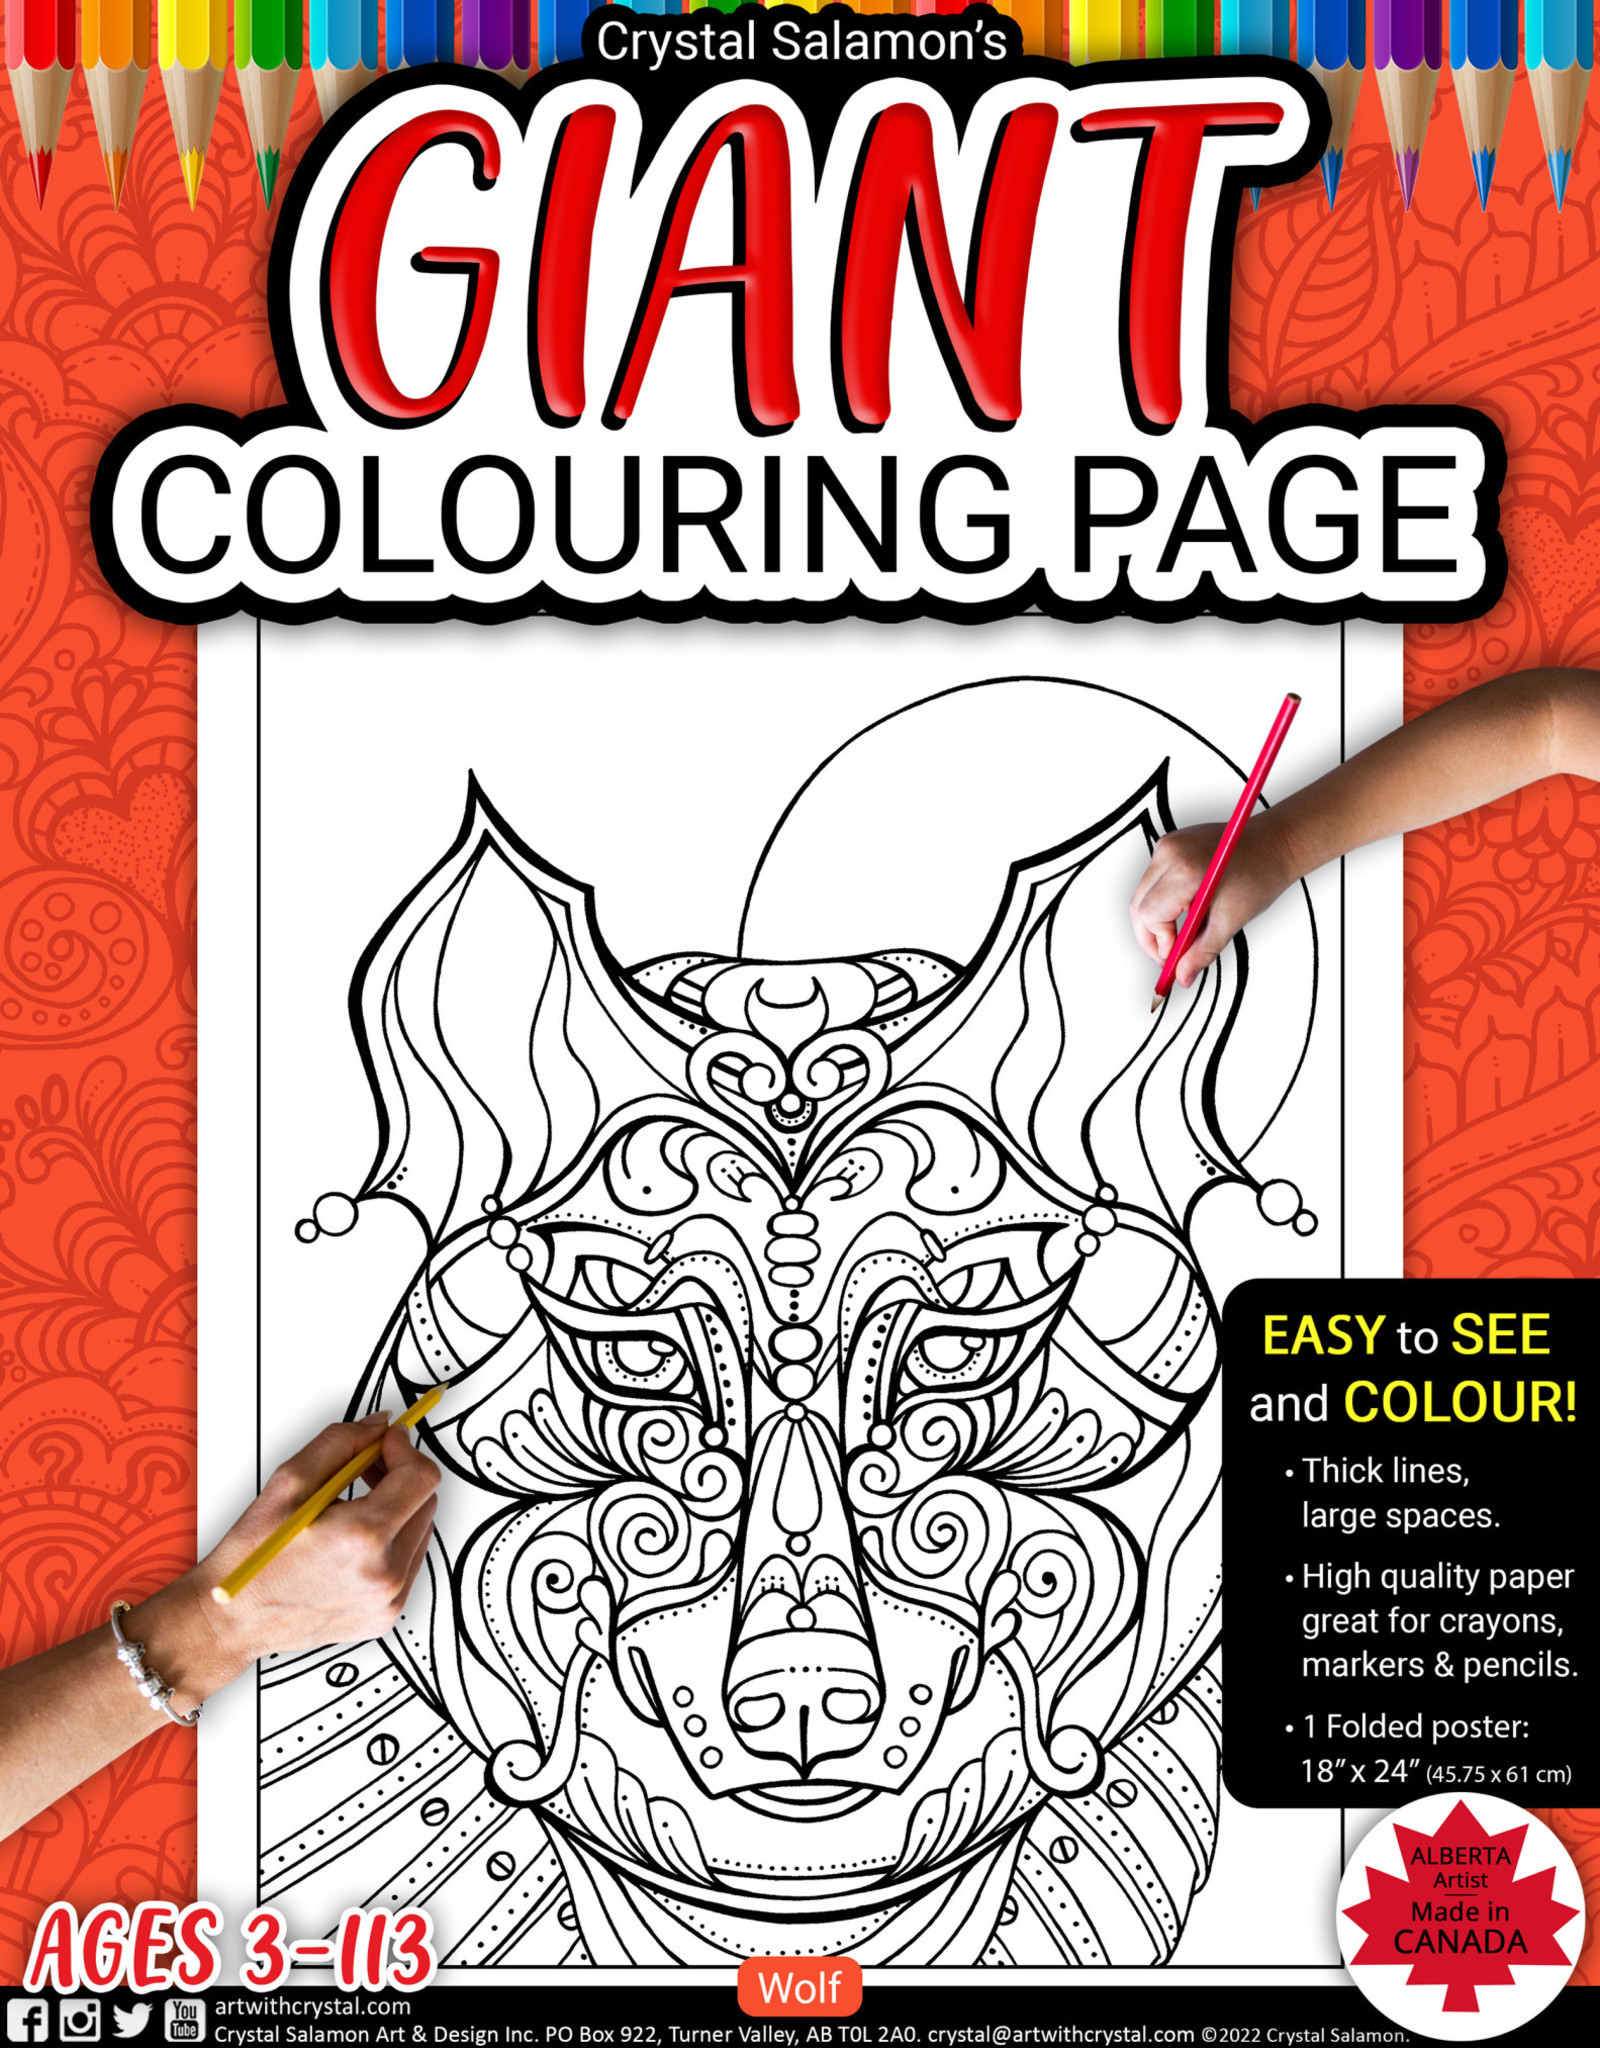 Crystal Salamon Giant Colouring Page - Wolf 24" x 18"